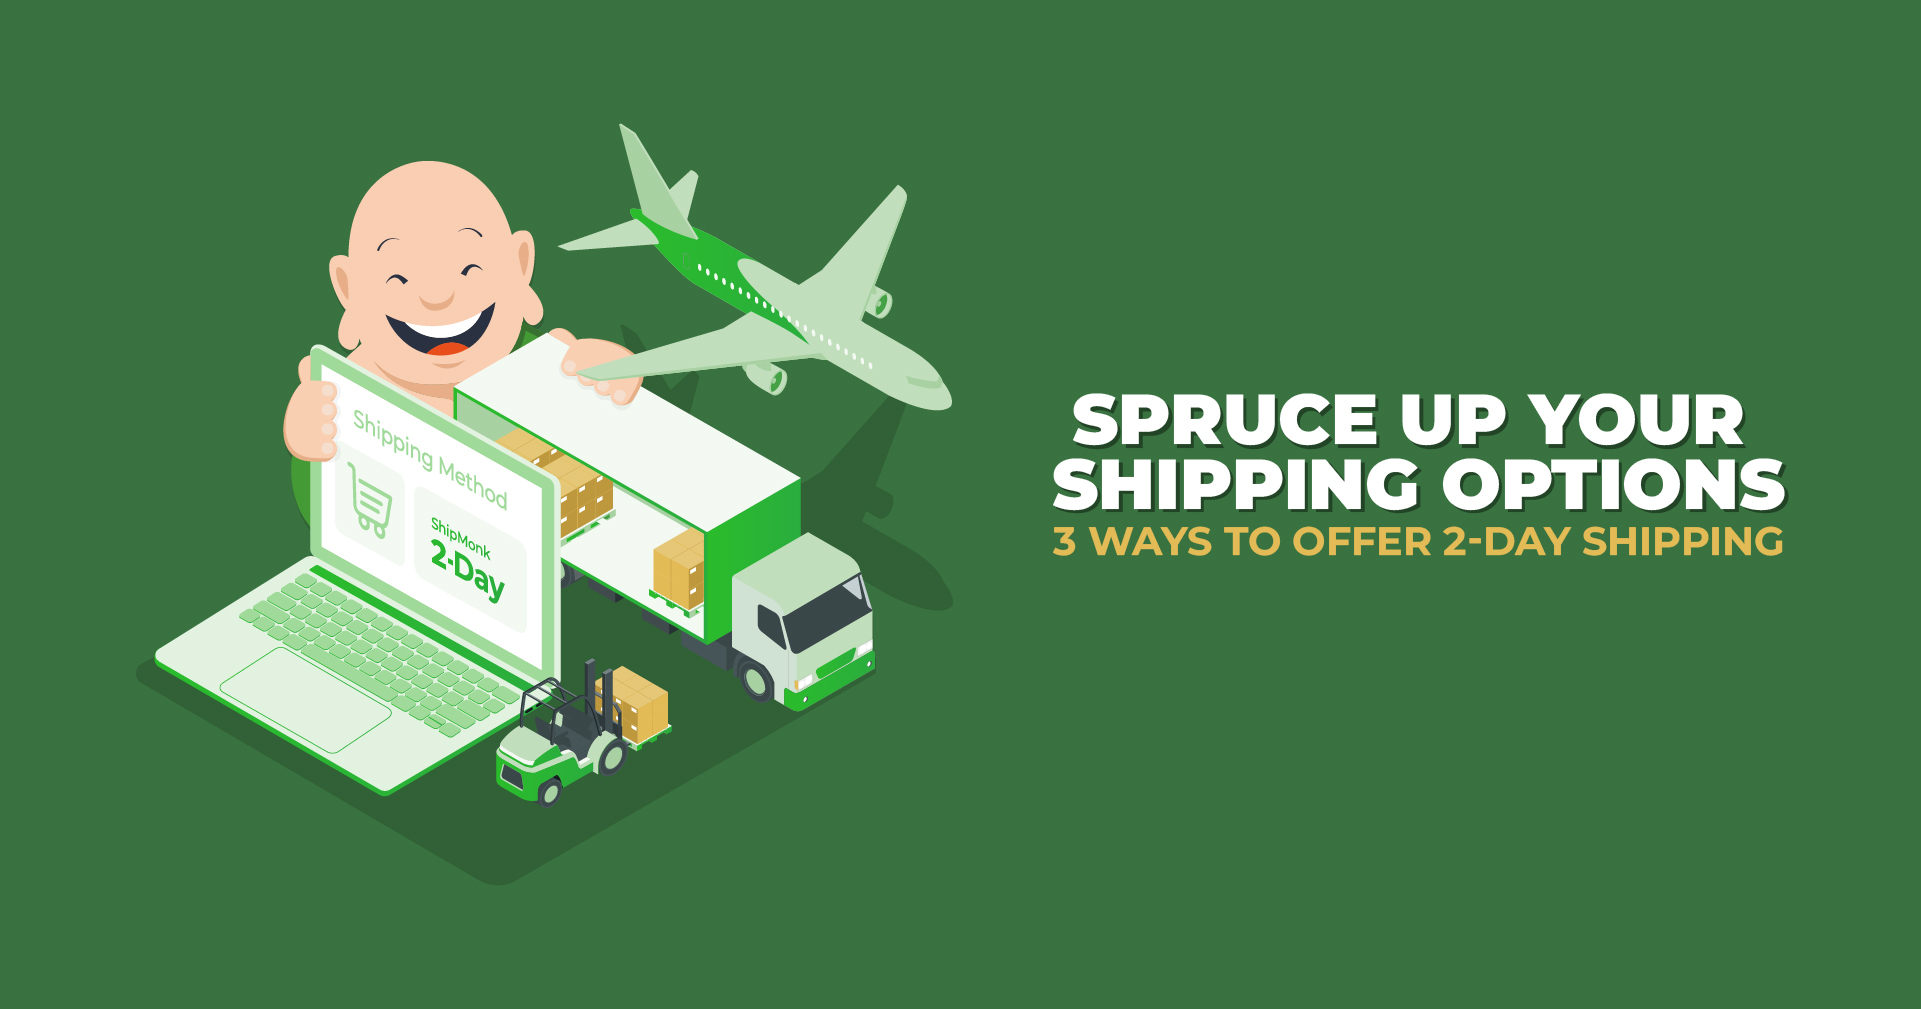 Spruce Up Your Shipping Options